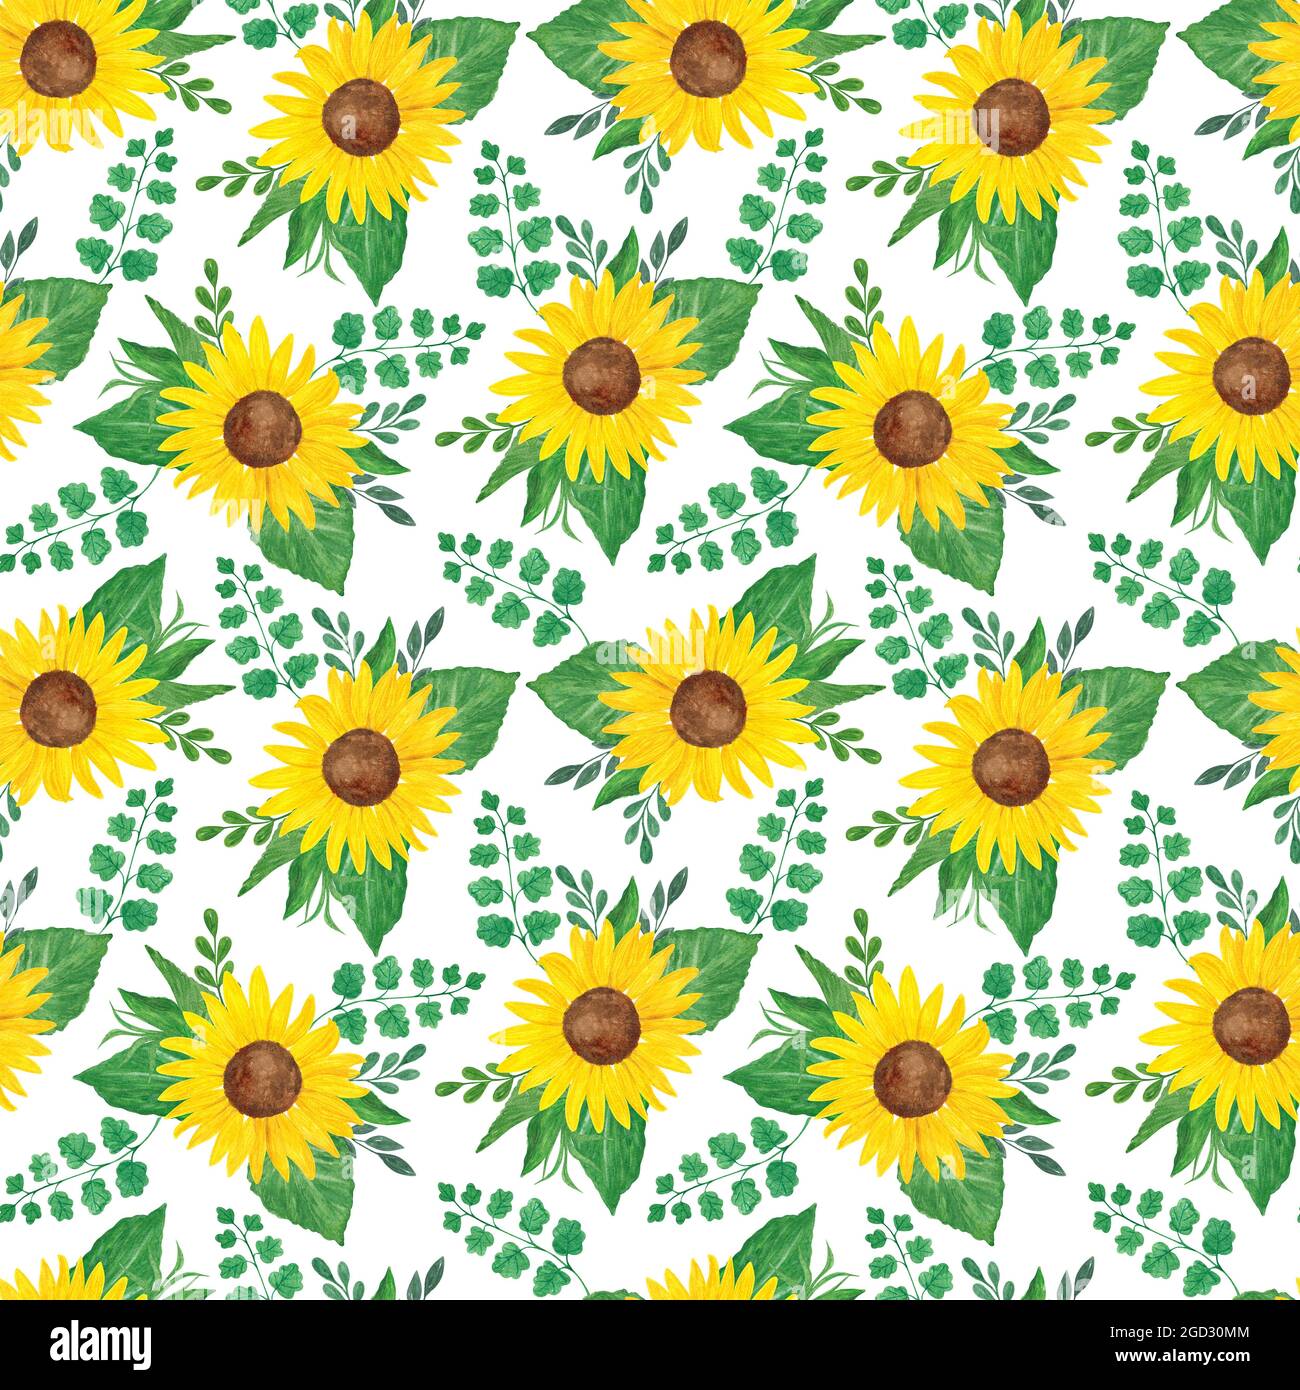 Yellow sunflowers and leaves floral arrangement seamless pattern, symbol of summer and harvest time period for textile, gift paper decor Stock Photo